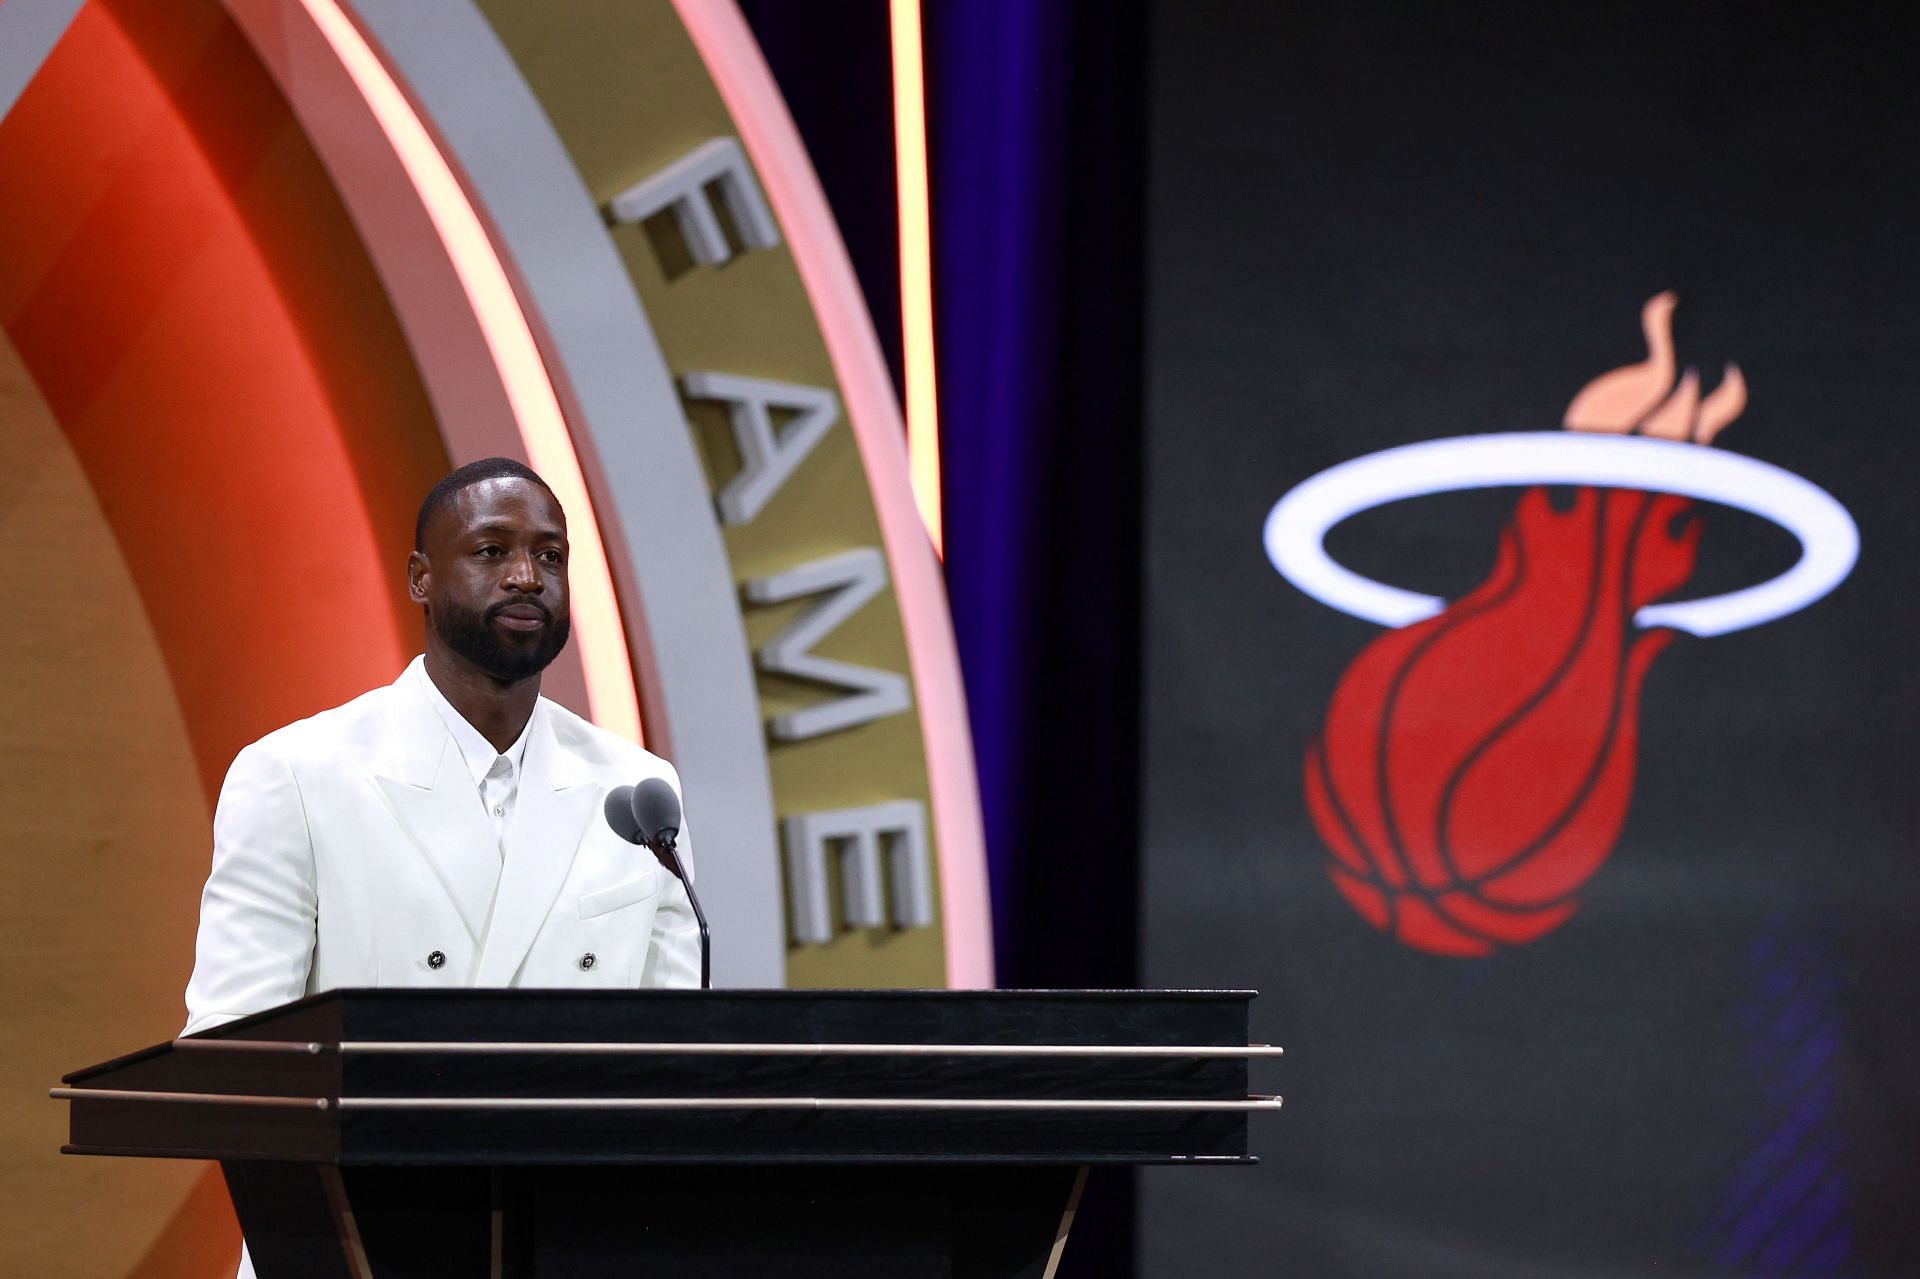 Dwyane Wade was inducted to the Naismith Memorial Hall of Fame this year.